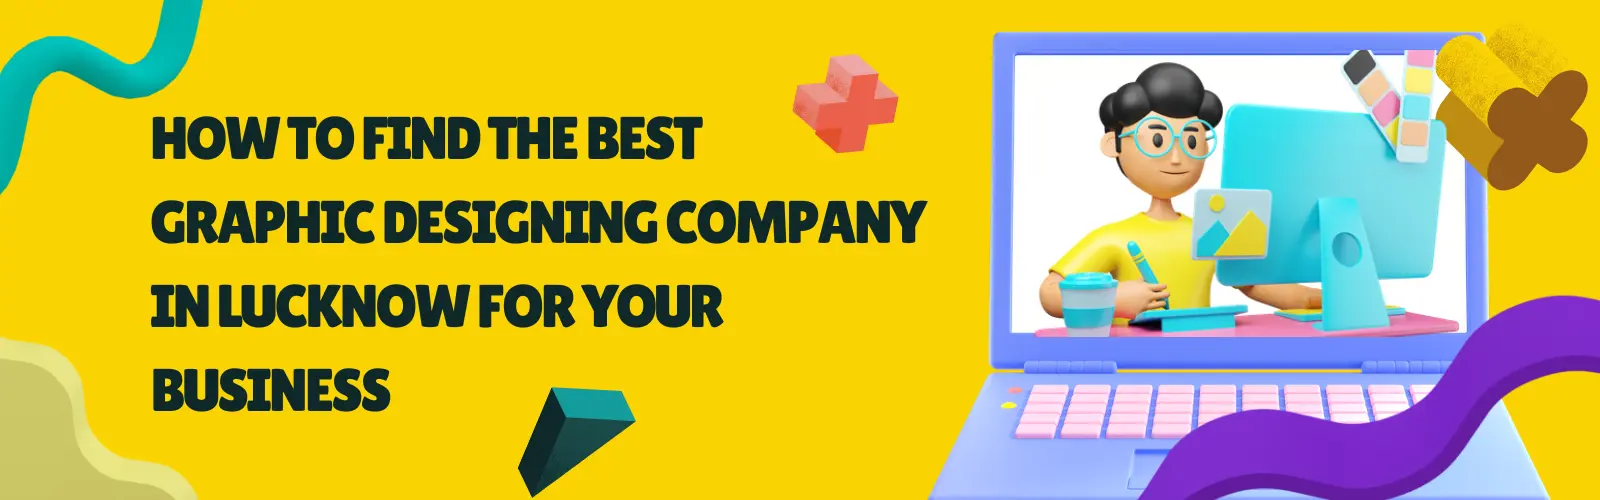 How to Find the Best Graphic Designing Company in Lucknow for Your Business